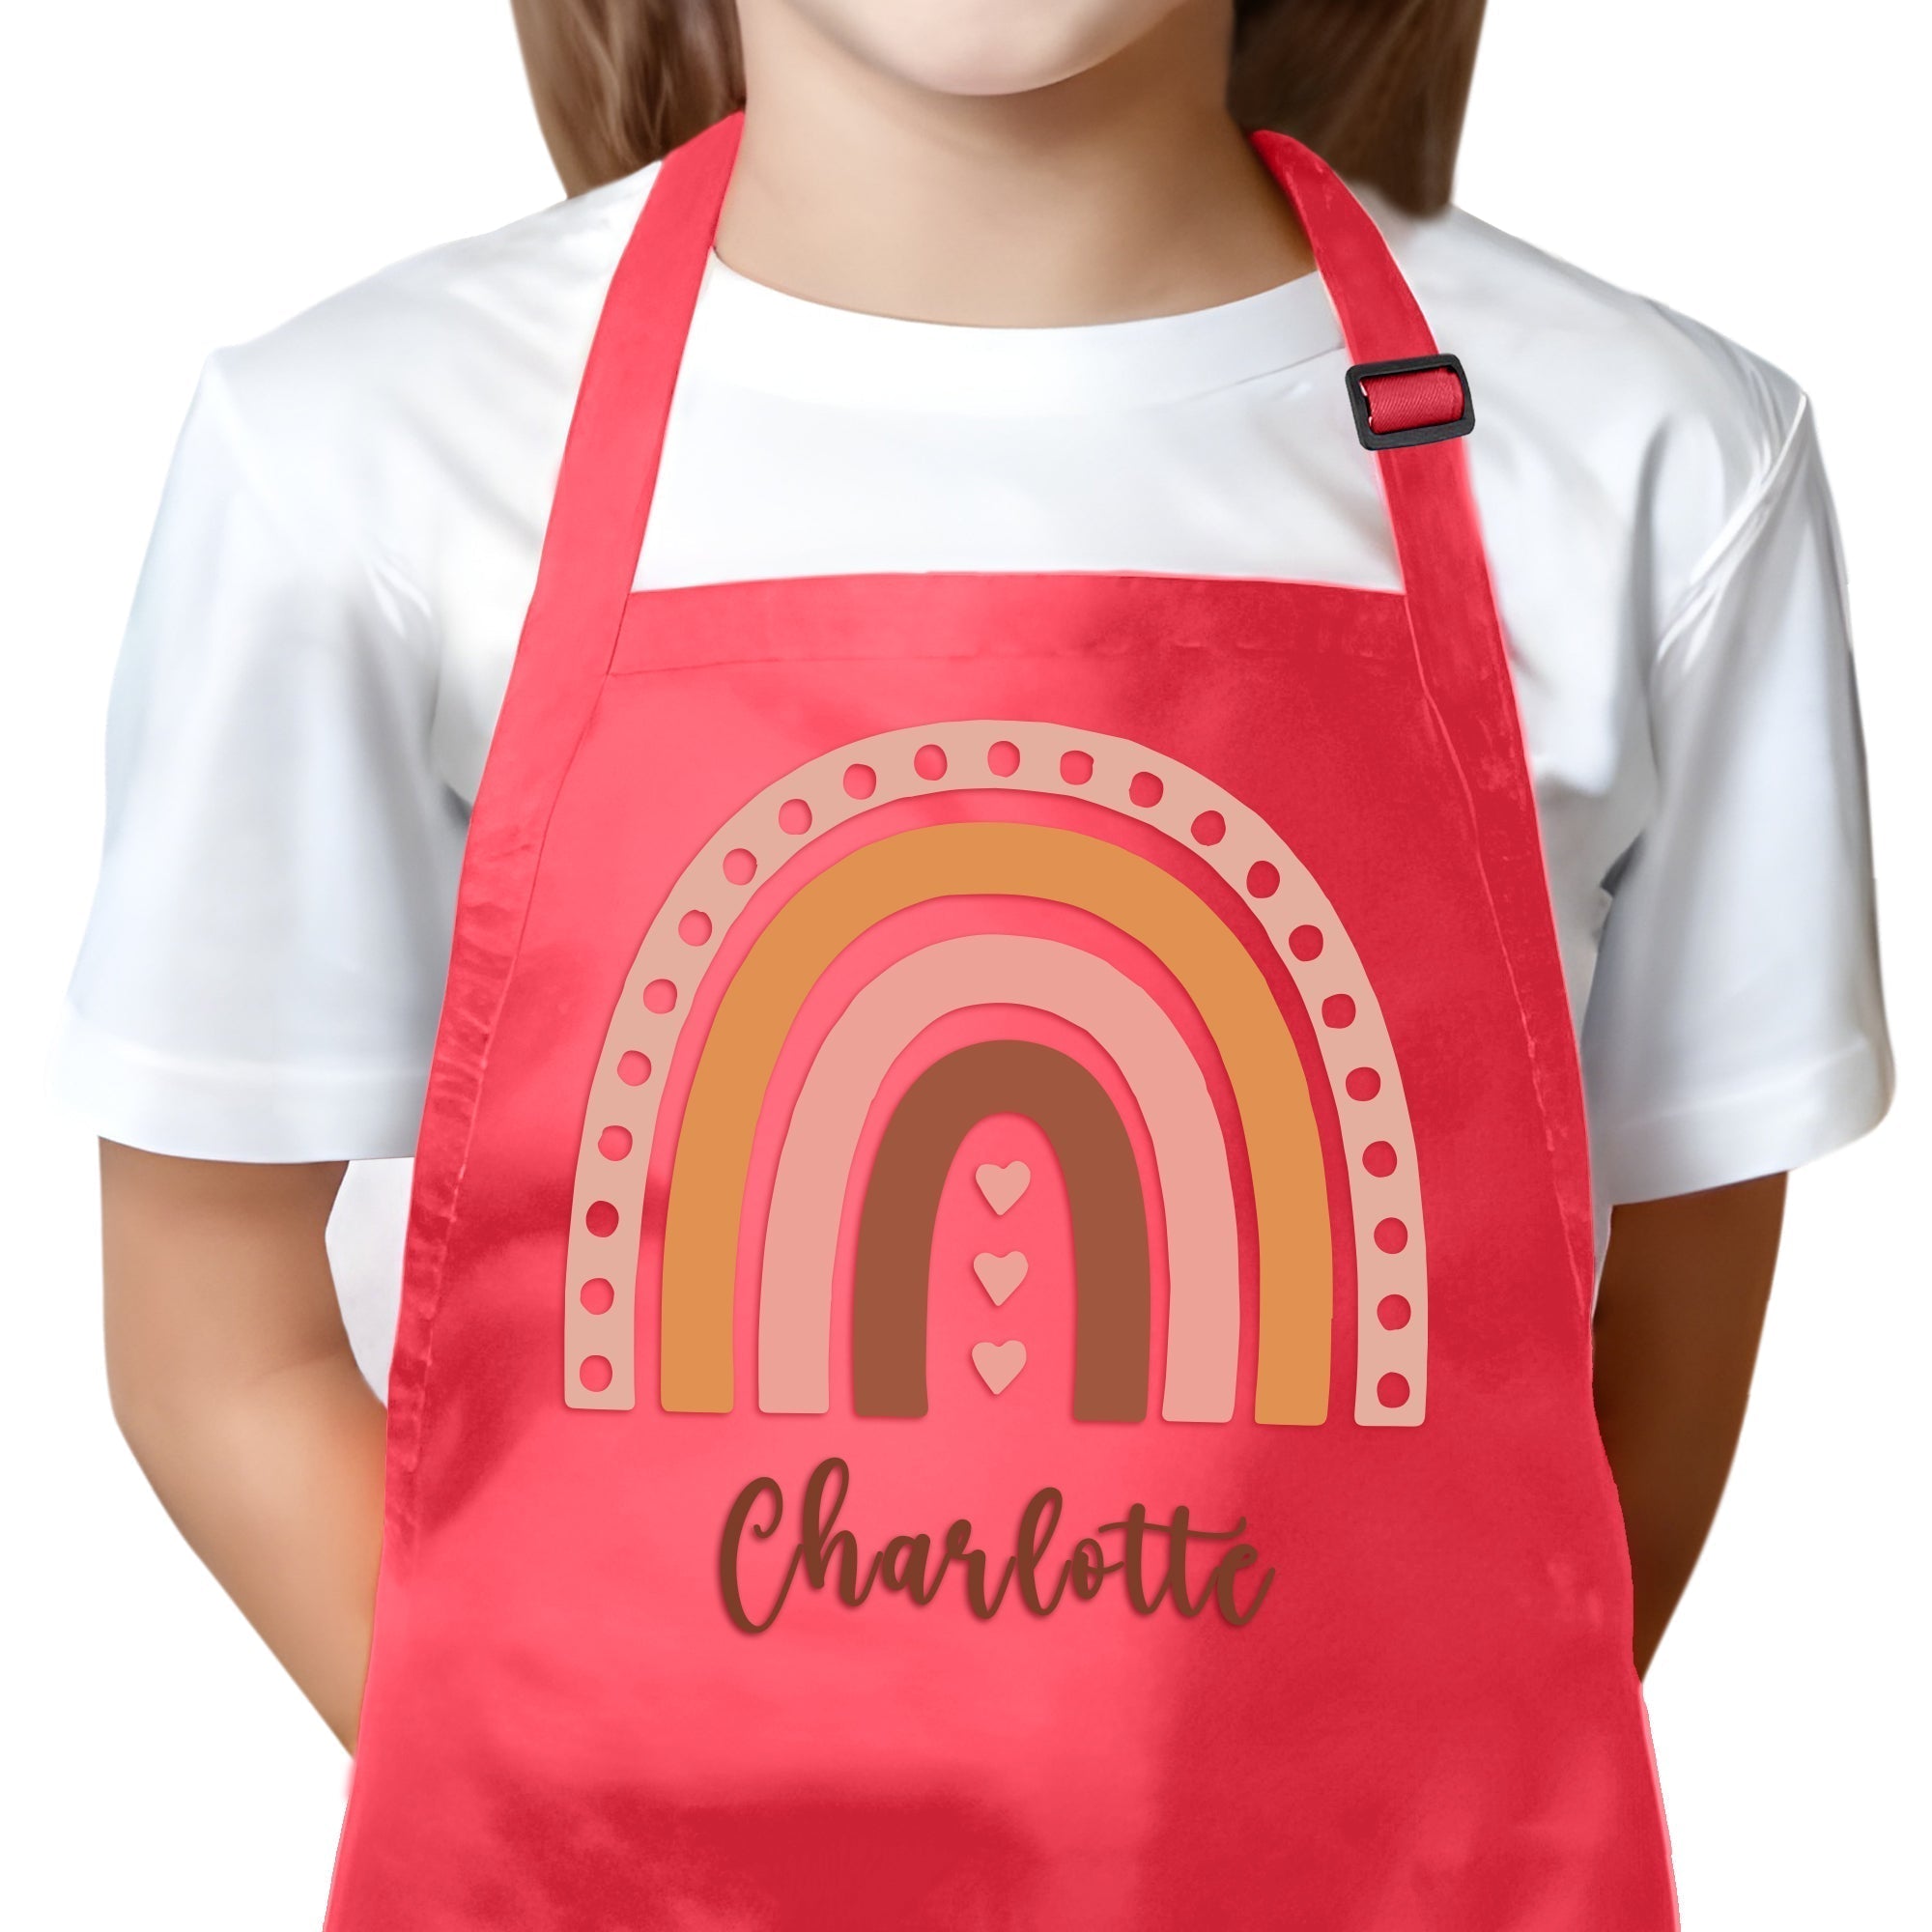 Personalized Kids Pink Apron Rainbow BOHO Design with Custom Name - Custom Children's Cooking Little Helper Kitchen Apron - Unisex Baking Pink Apron for Boys and Girls